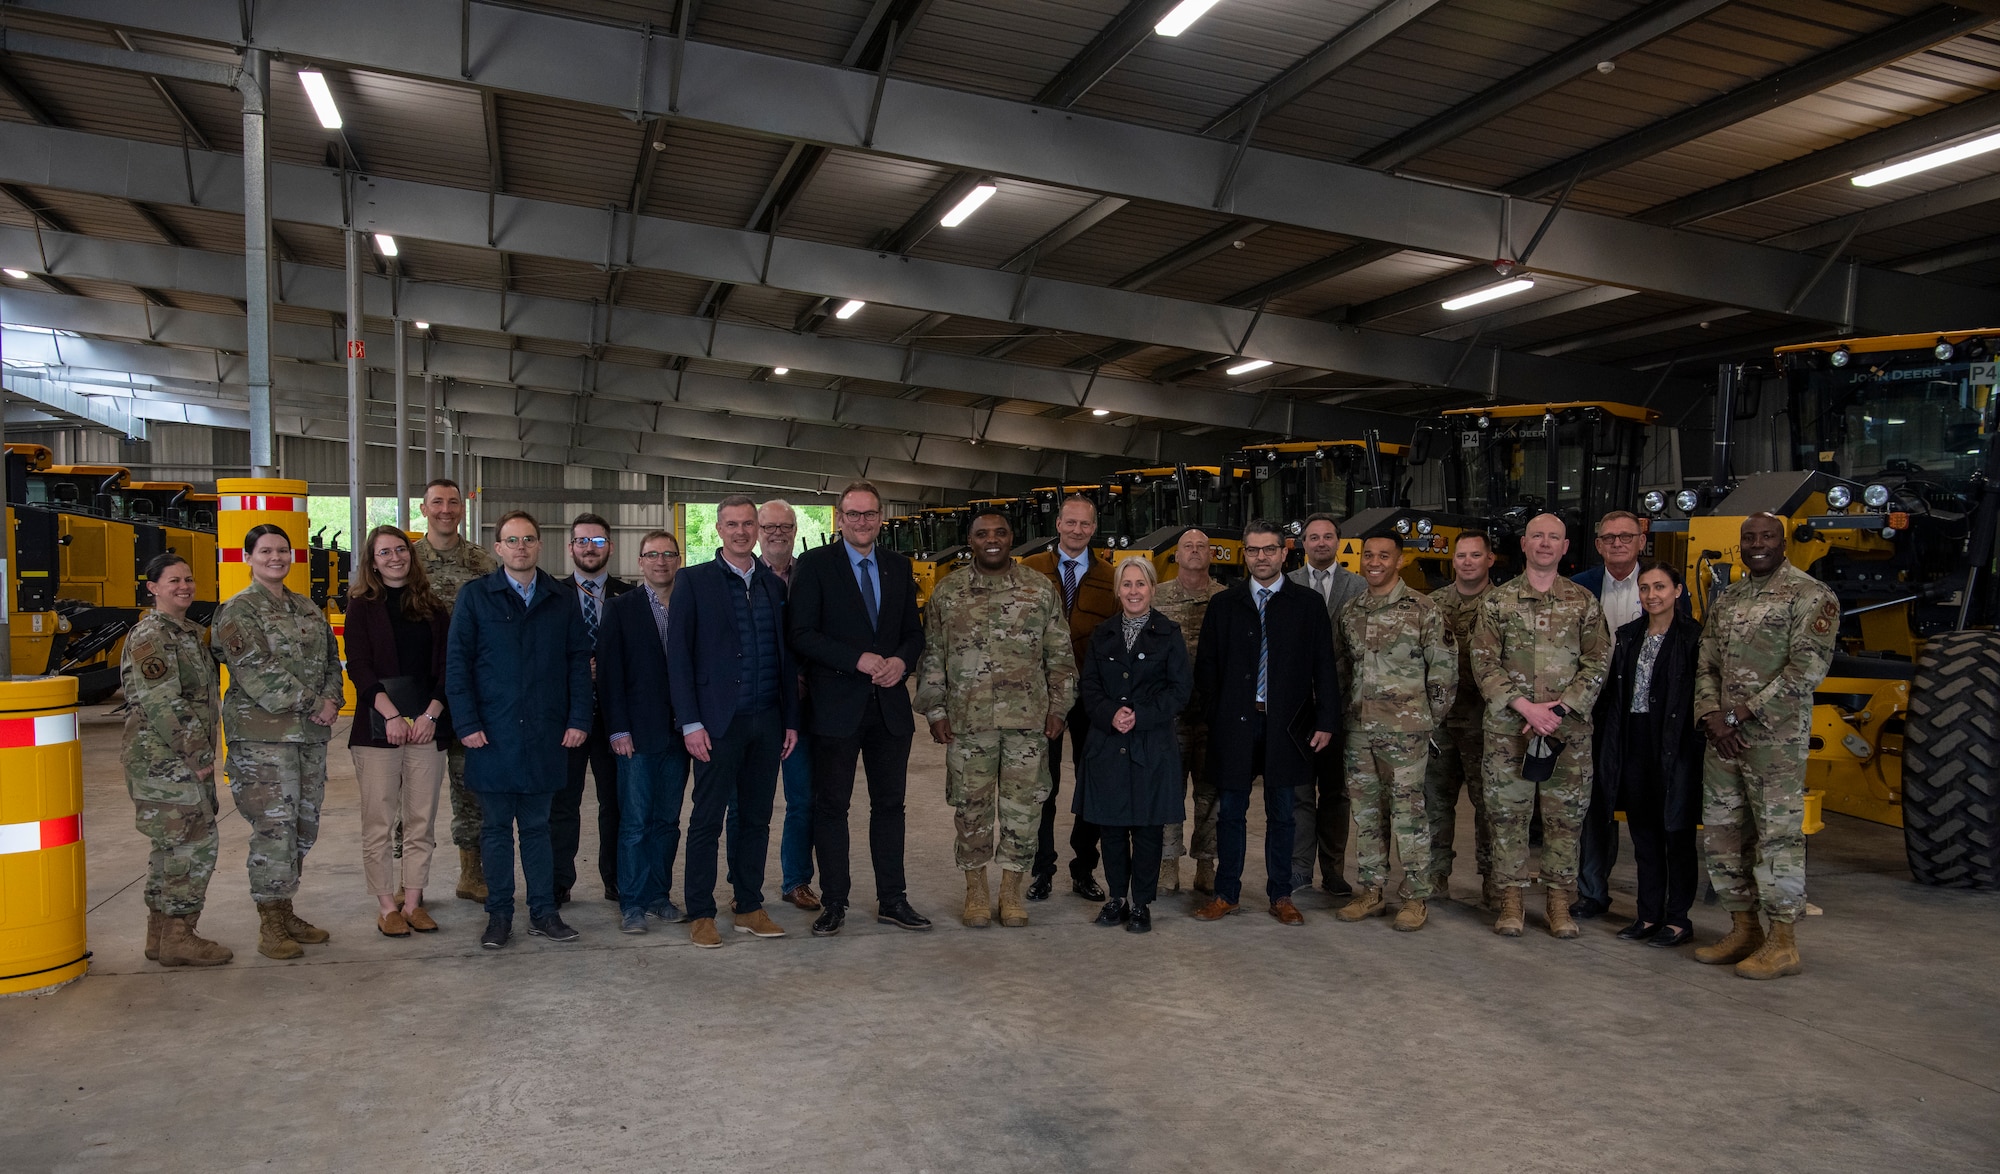 U.S. Air Force Brig. Gen. Otis C. Jones, 86th Airlift Wing commander, stands with civic leaders of the Kaiserslautern military community during a tour of a Department of Defense storage facility in Pirmasens, Germany, May 12, 2023.